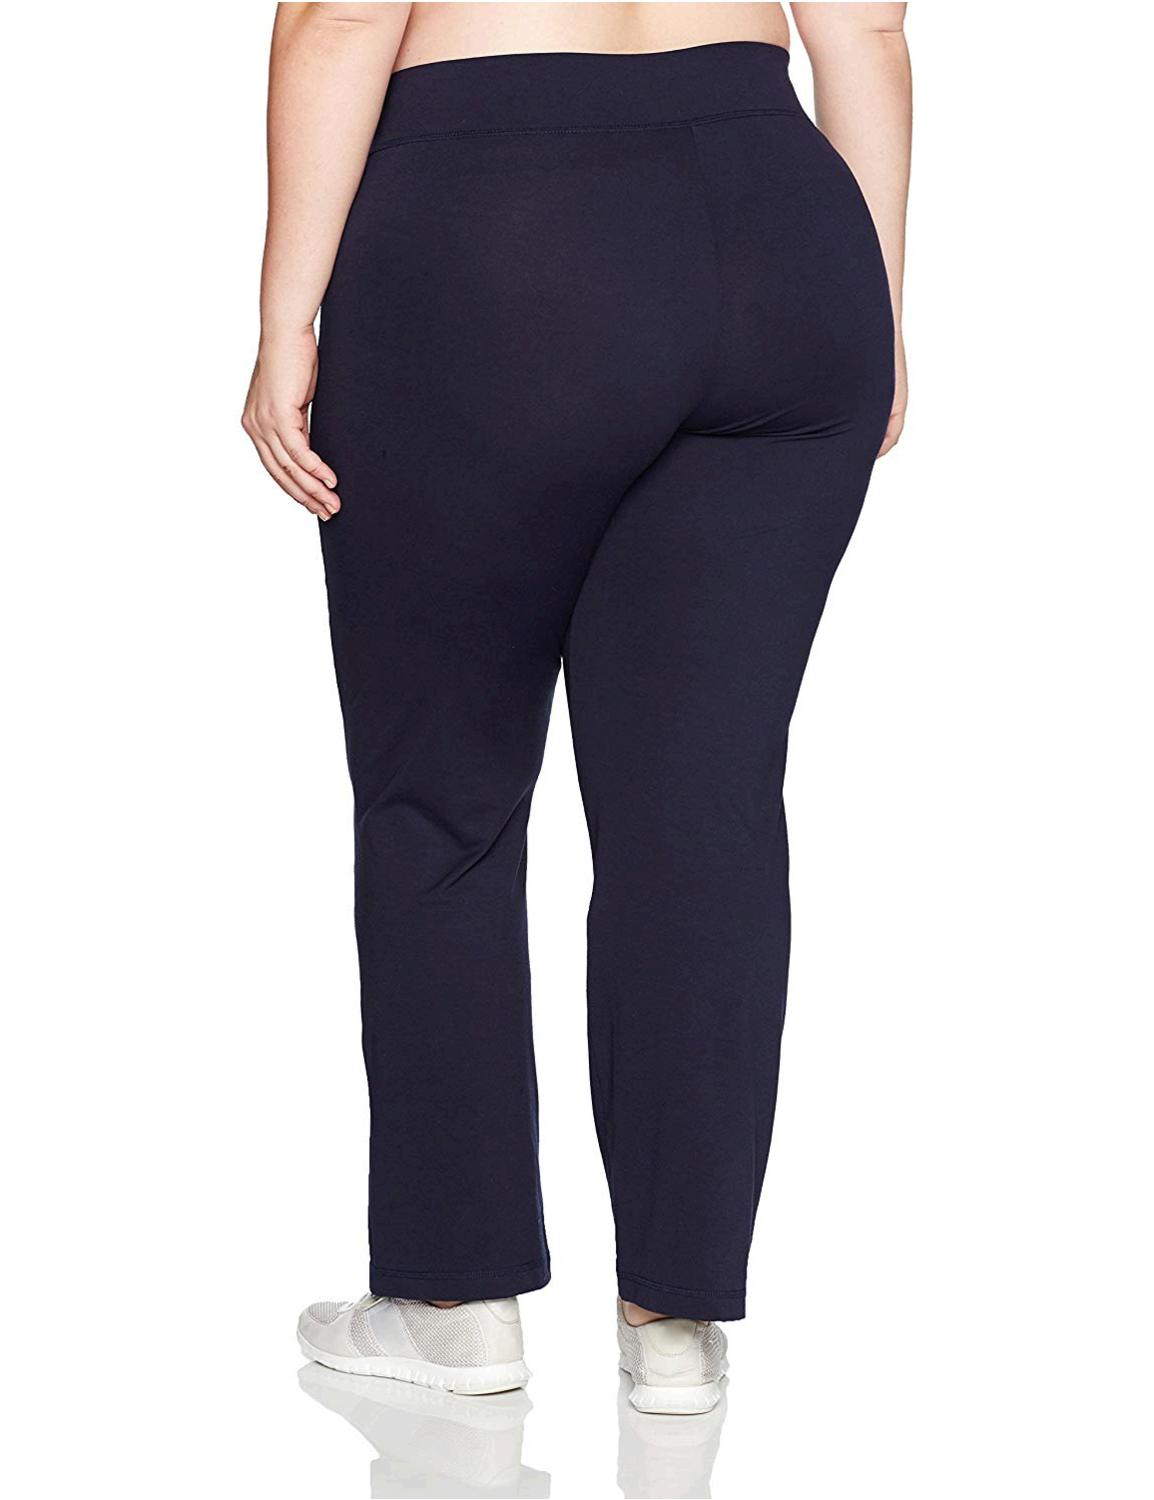 Plus Size Yoga Pants   International Society of Precision Agriculture